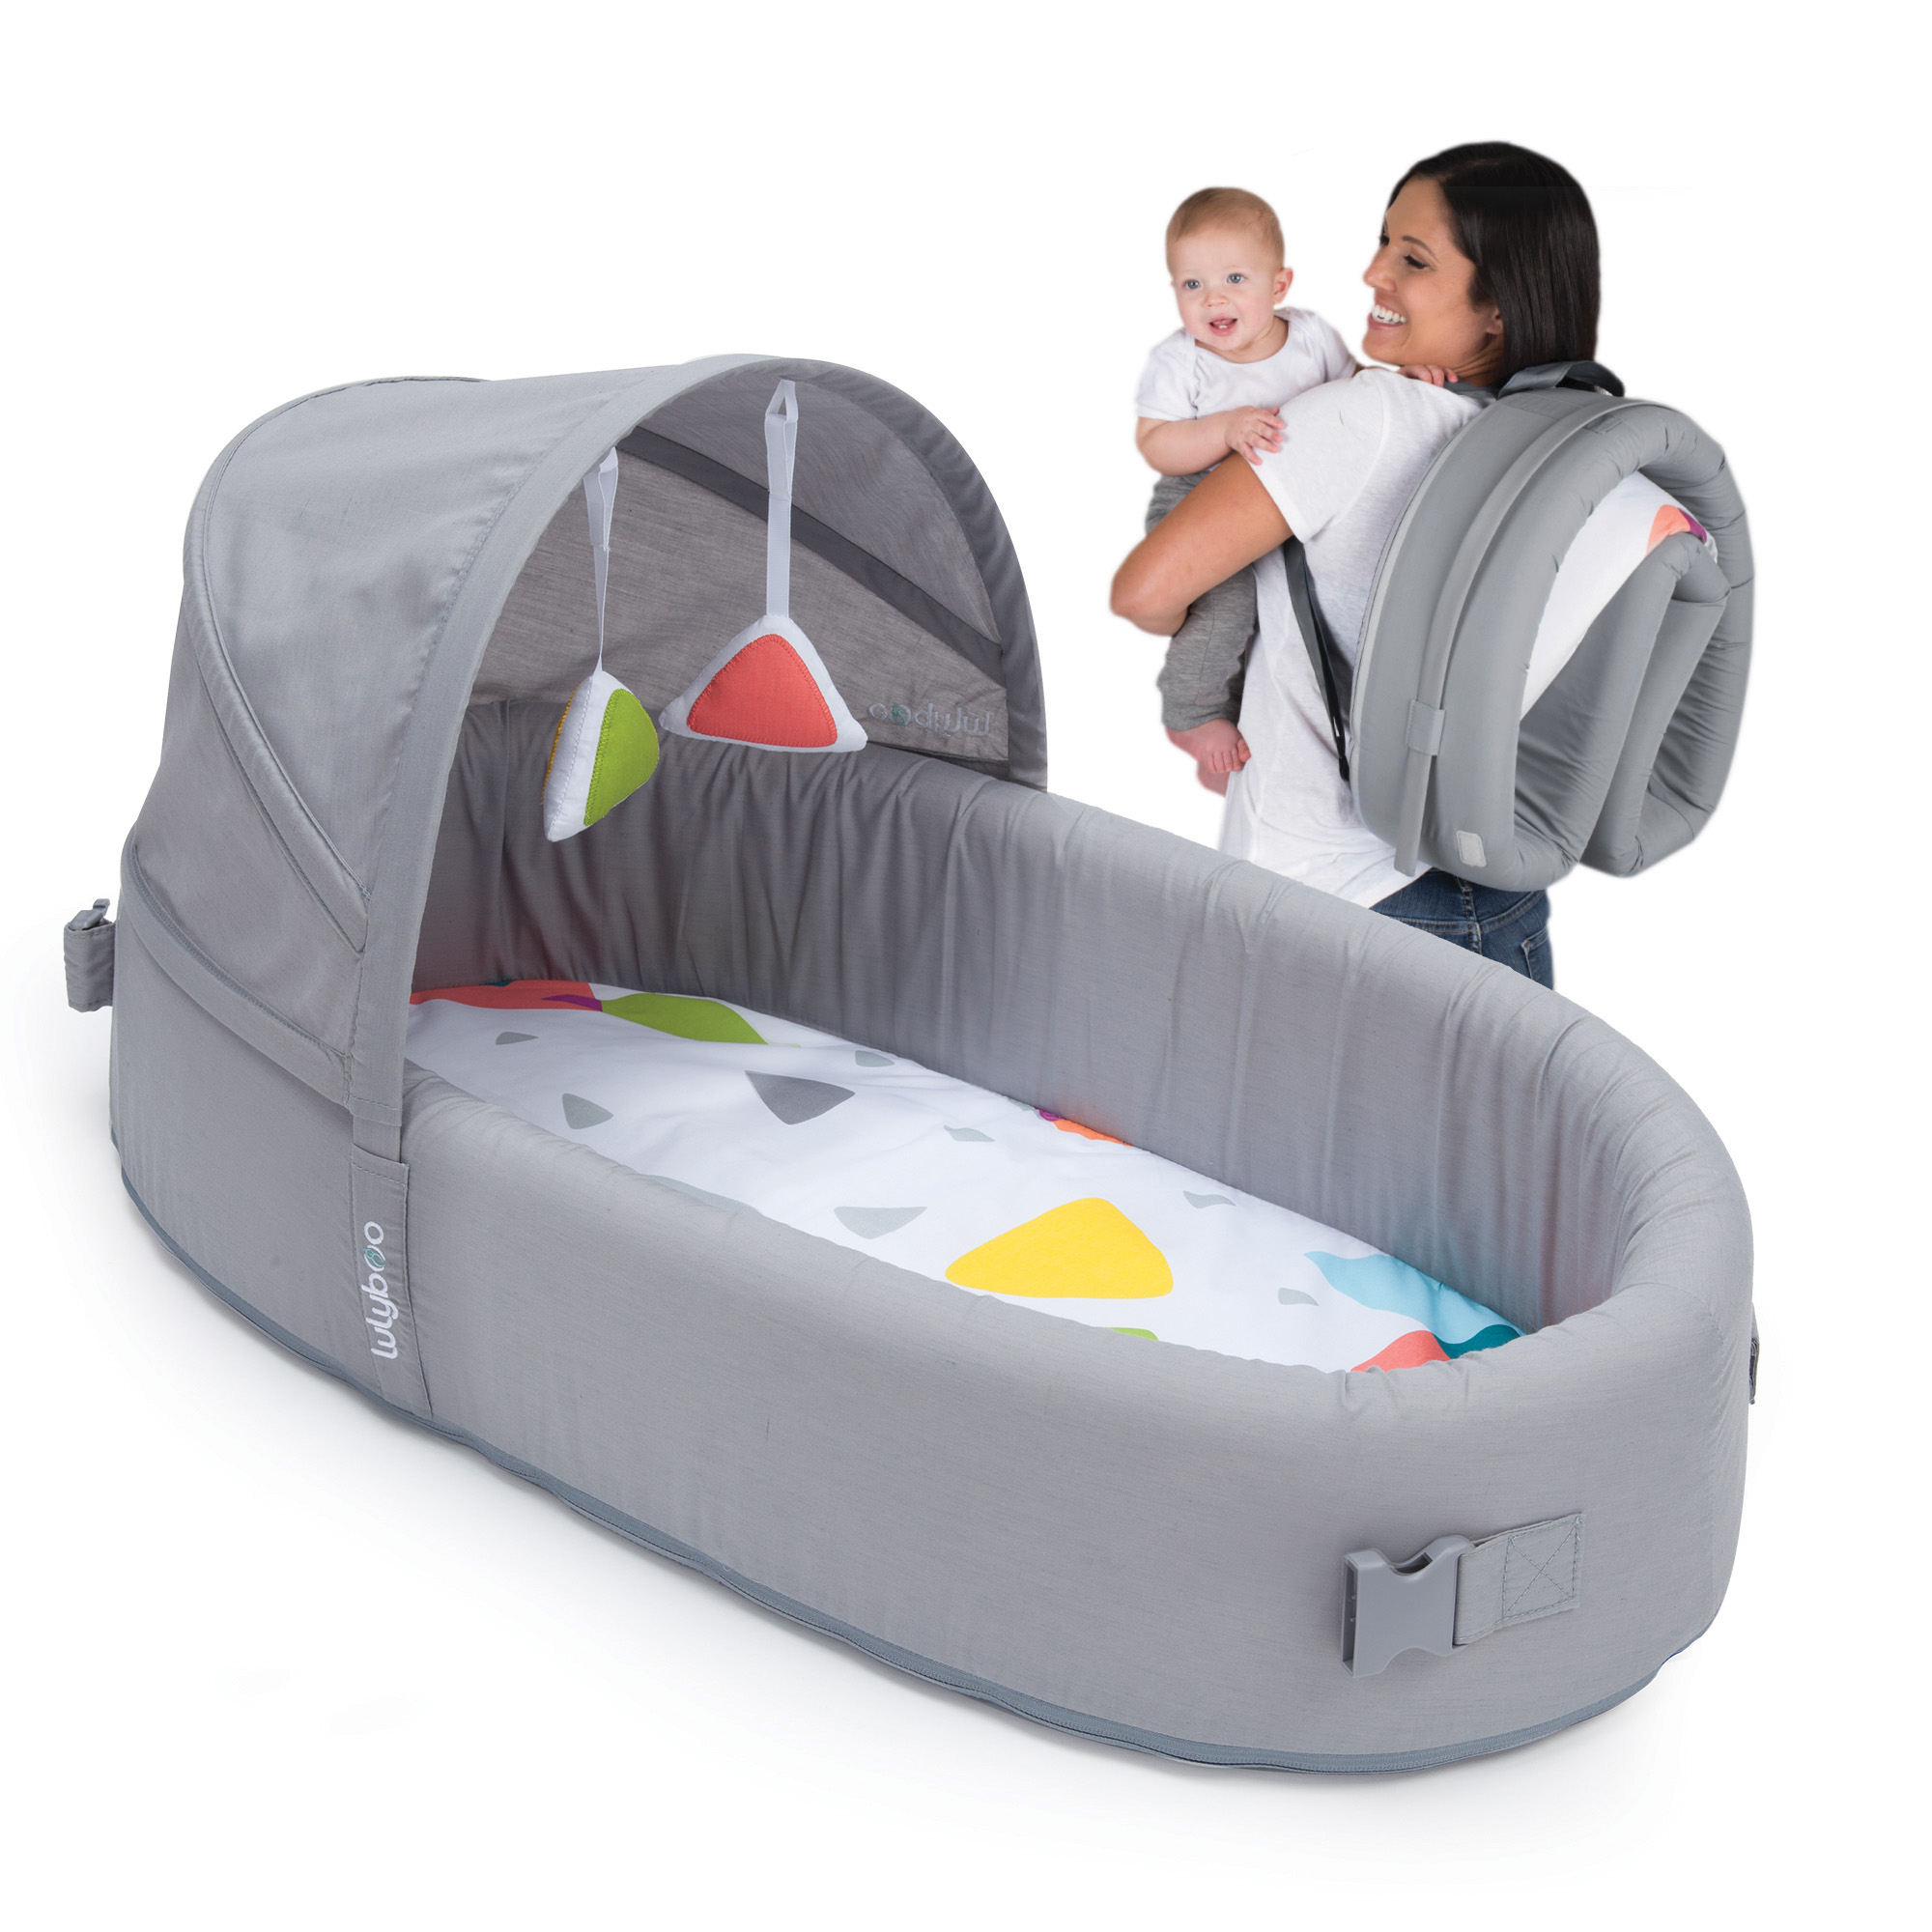 Yinuoday Baby Lounger Portable Baby Bed Cosleeper Bassinet Infant Sleeper Baby Crib Nursery Travel Folding Baby Bed Bag for 0-12 Month Baby Grey + Beige White